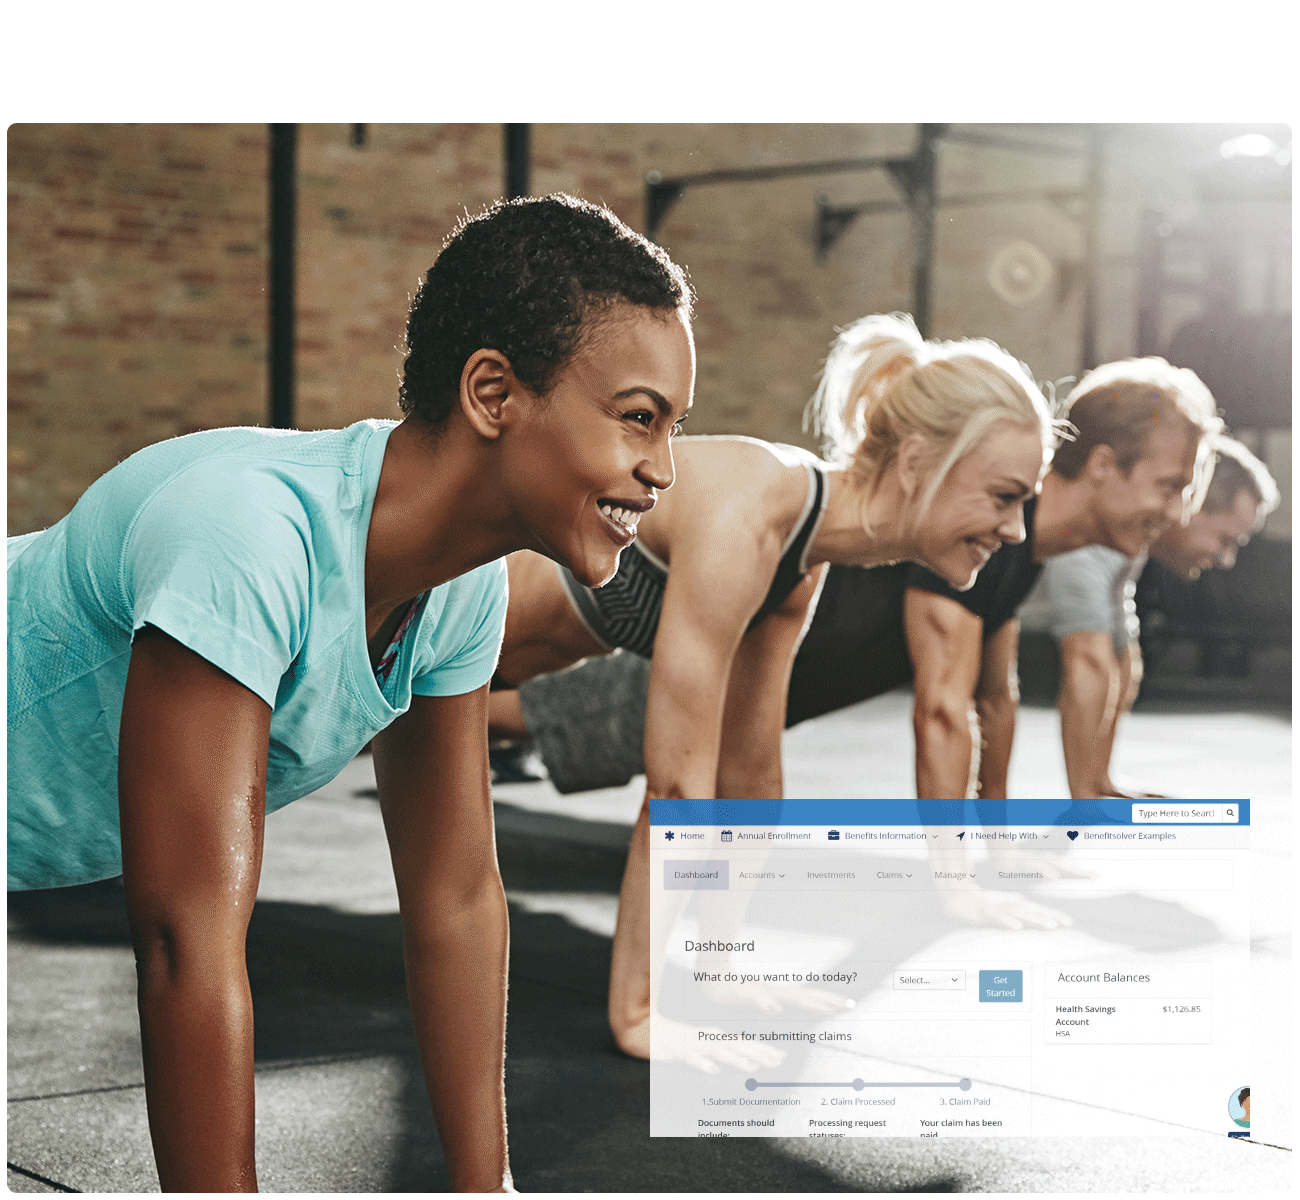 People in a fitness class with an image of the employee dashboard view.